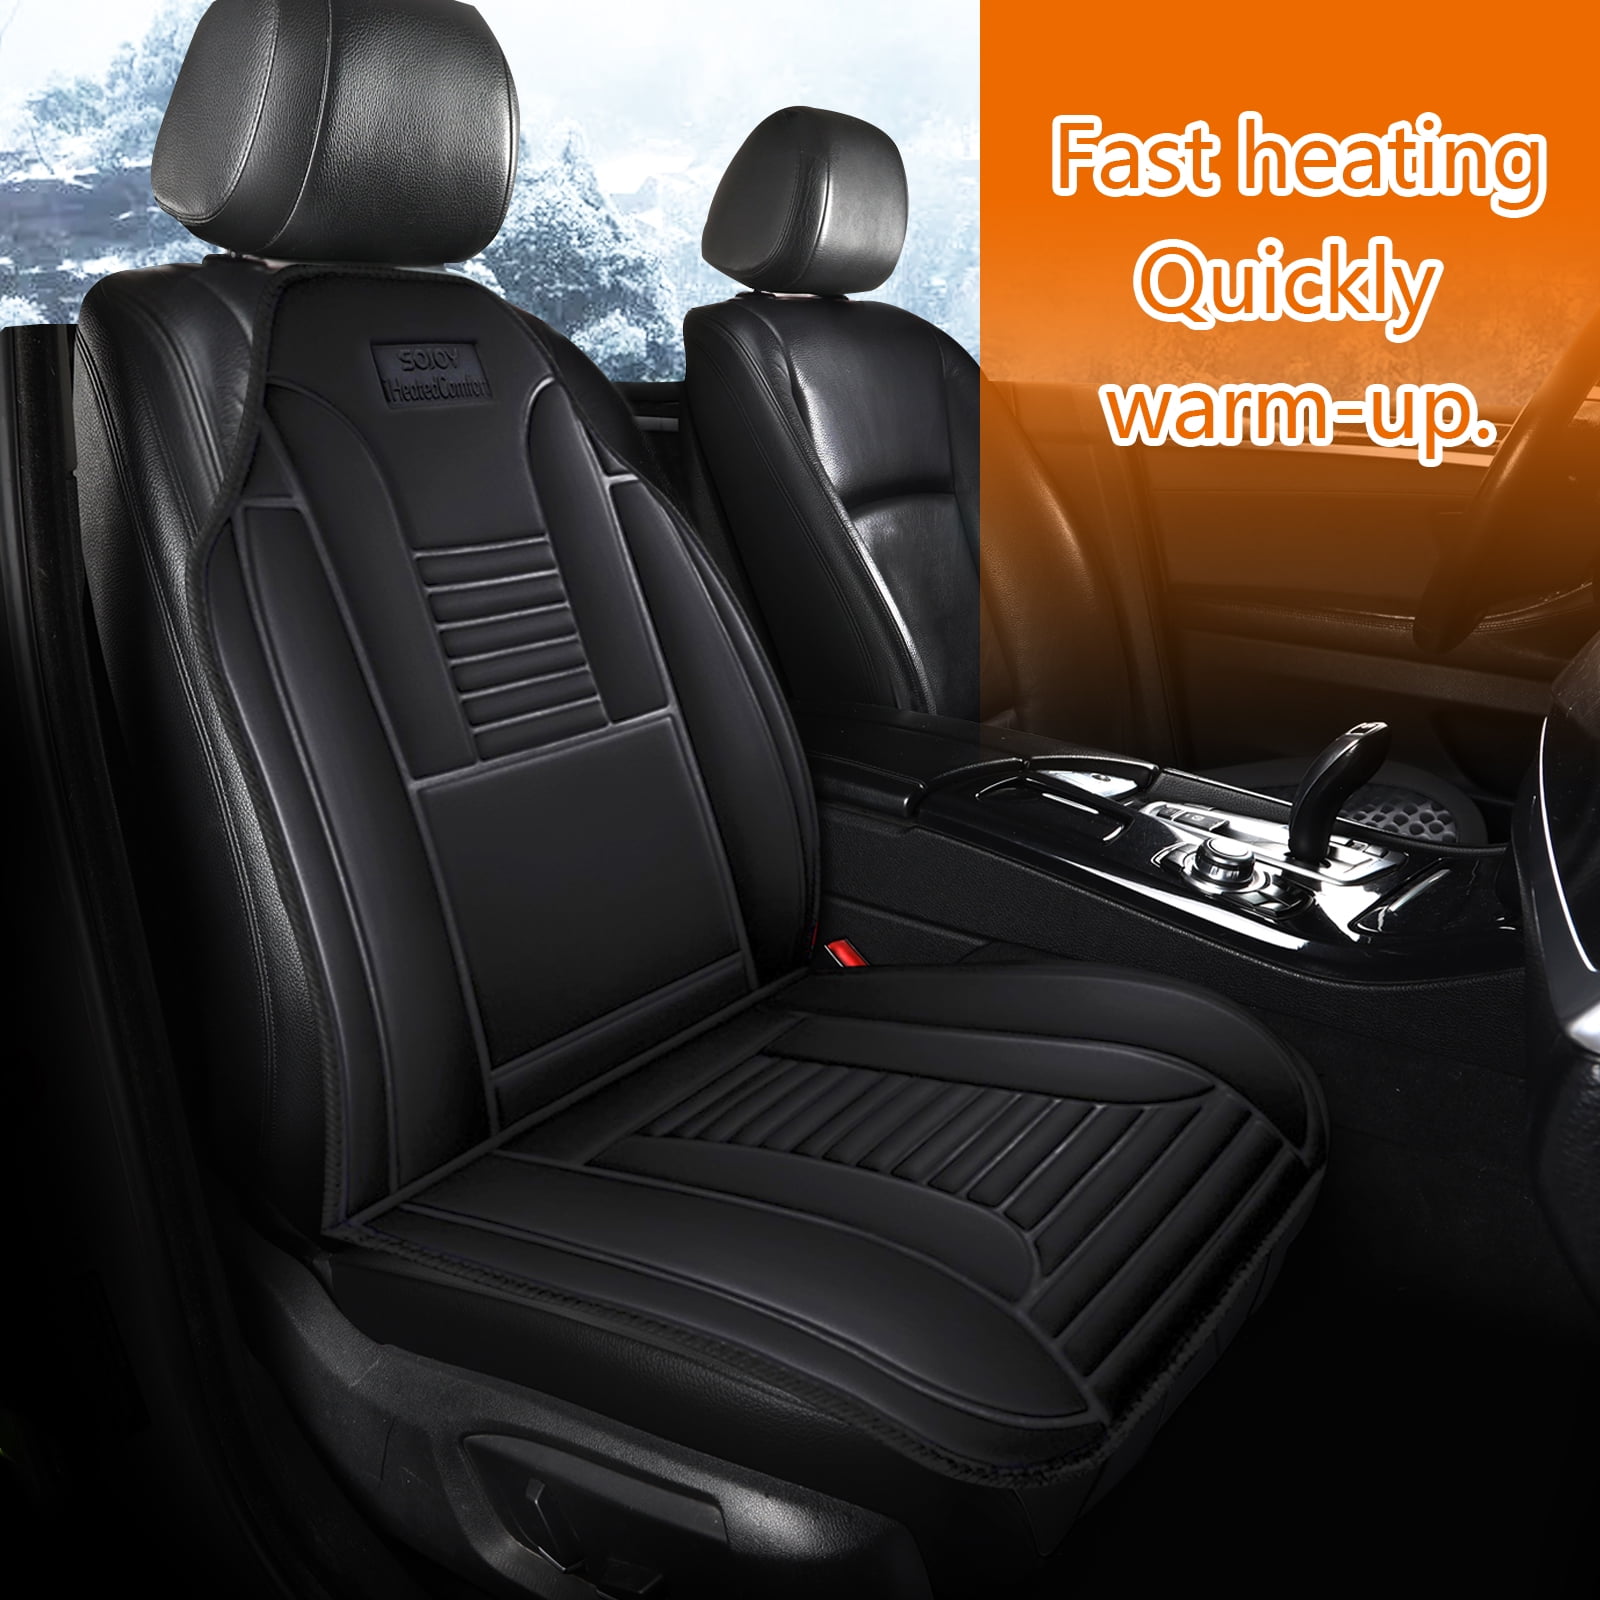 The Black Series Heated Auto Seat Cushion, Low and High Heat Modes, Secure  Fit, Universal For Any Car - JCPenney